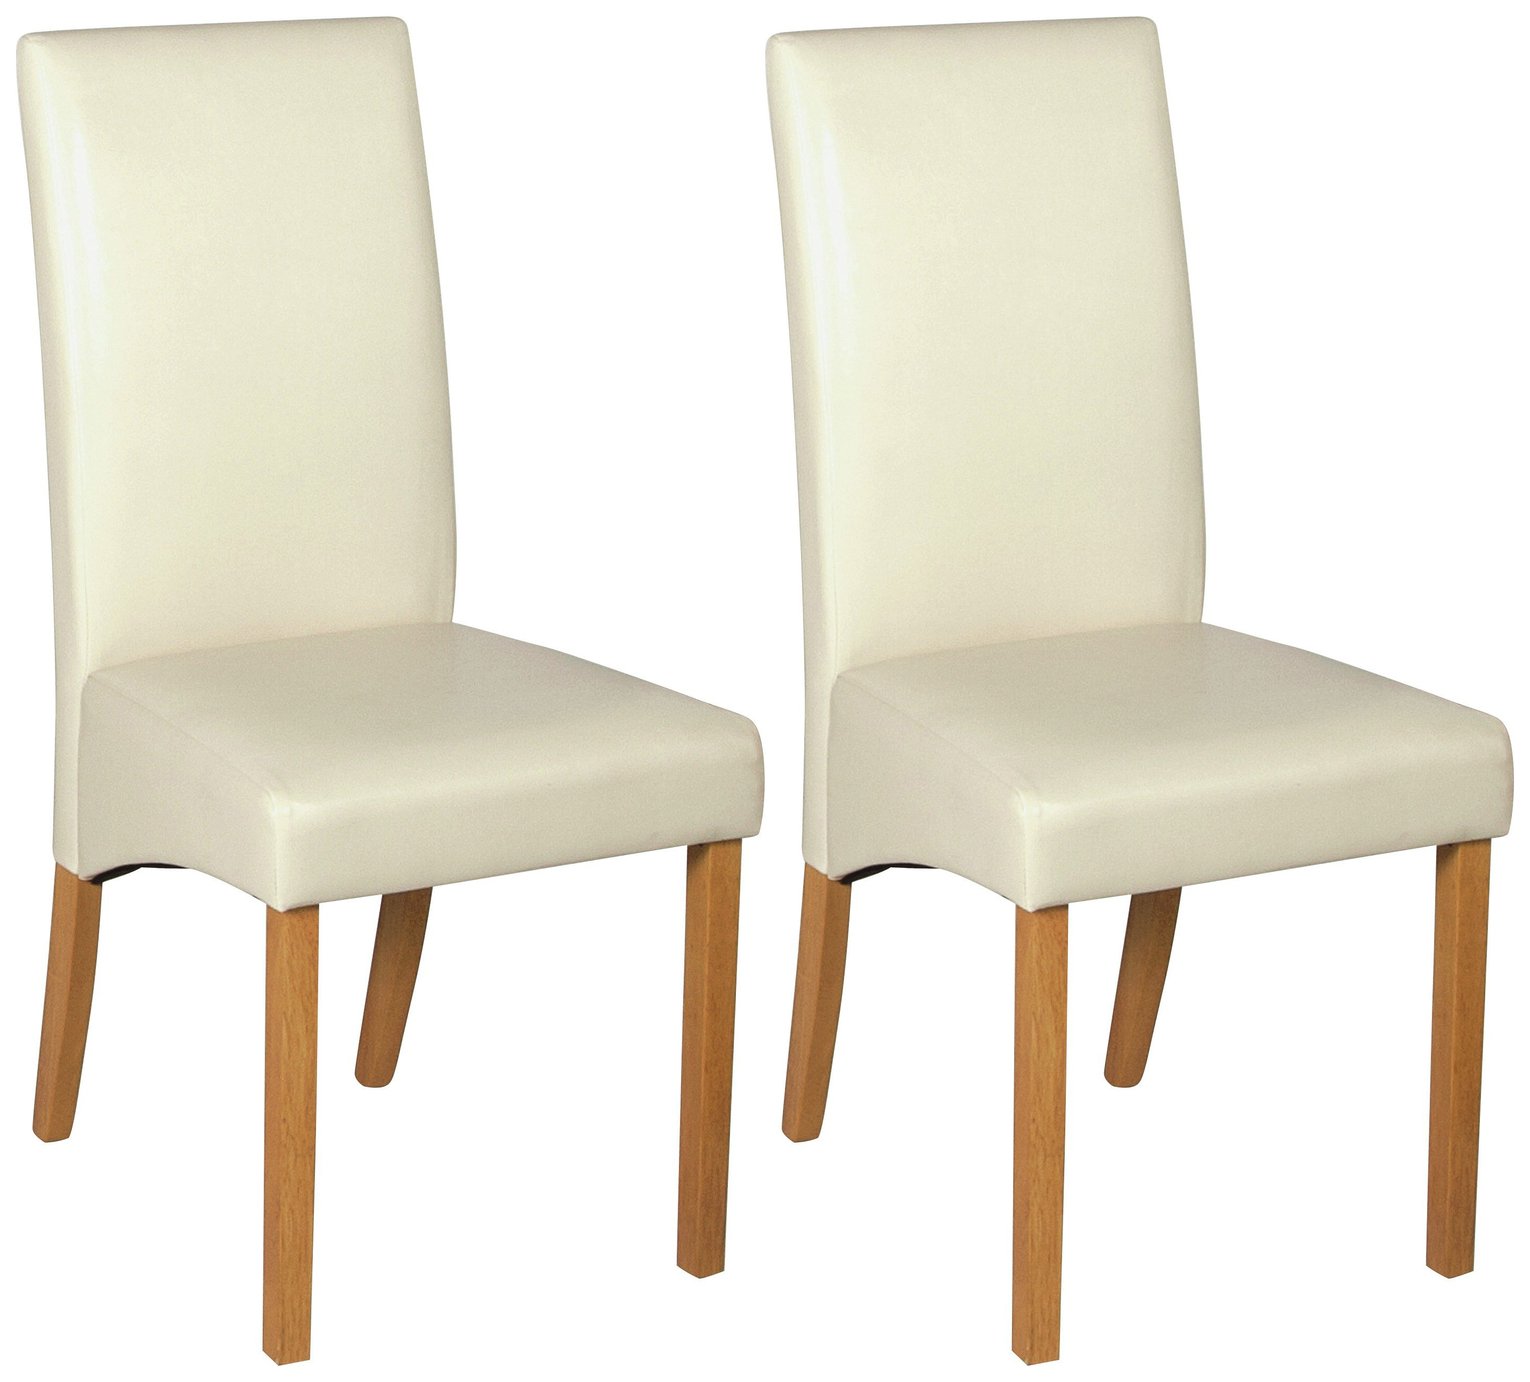 Argos Home Pair of Skirted Dining Chairs - Cream